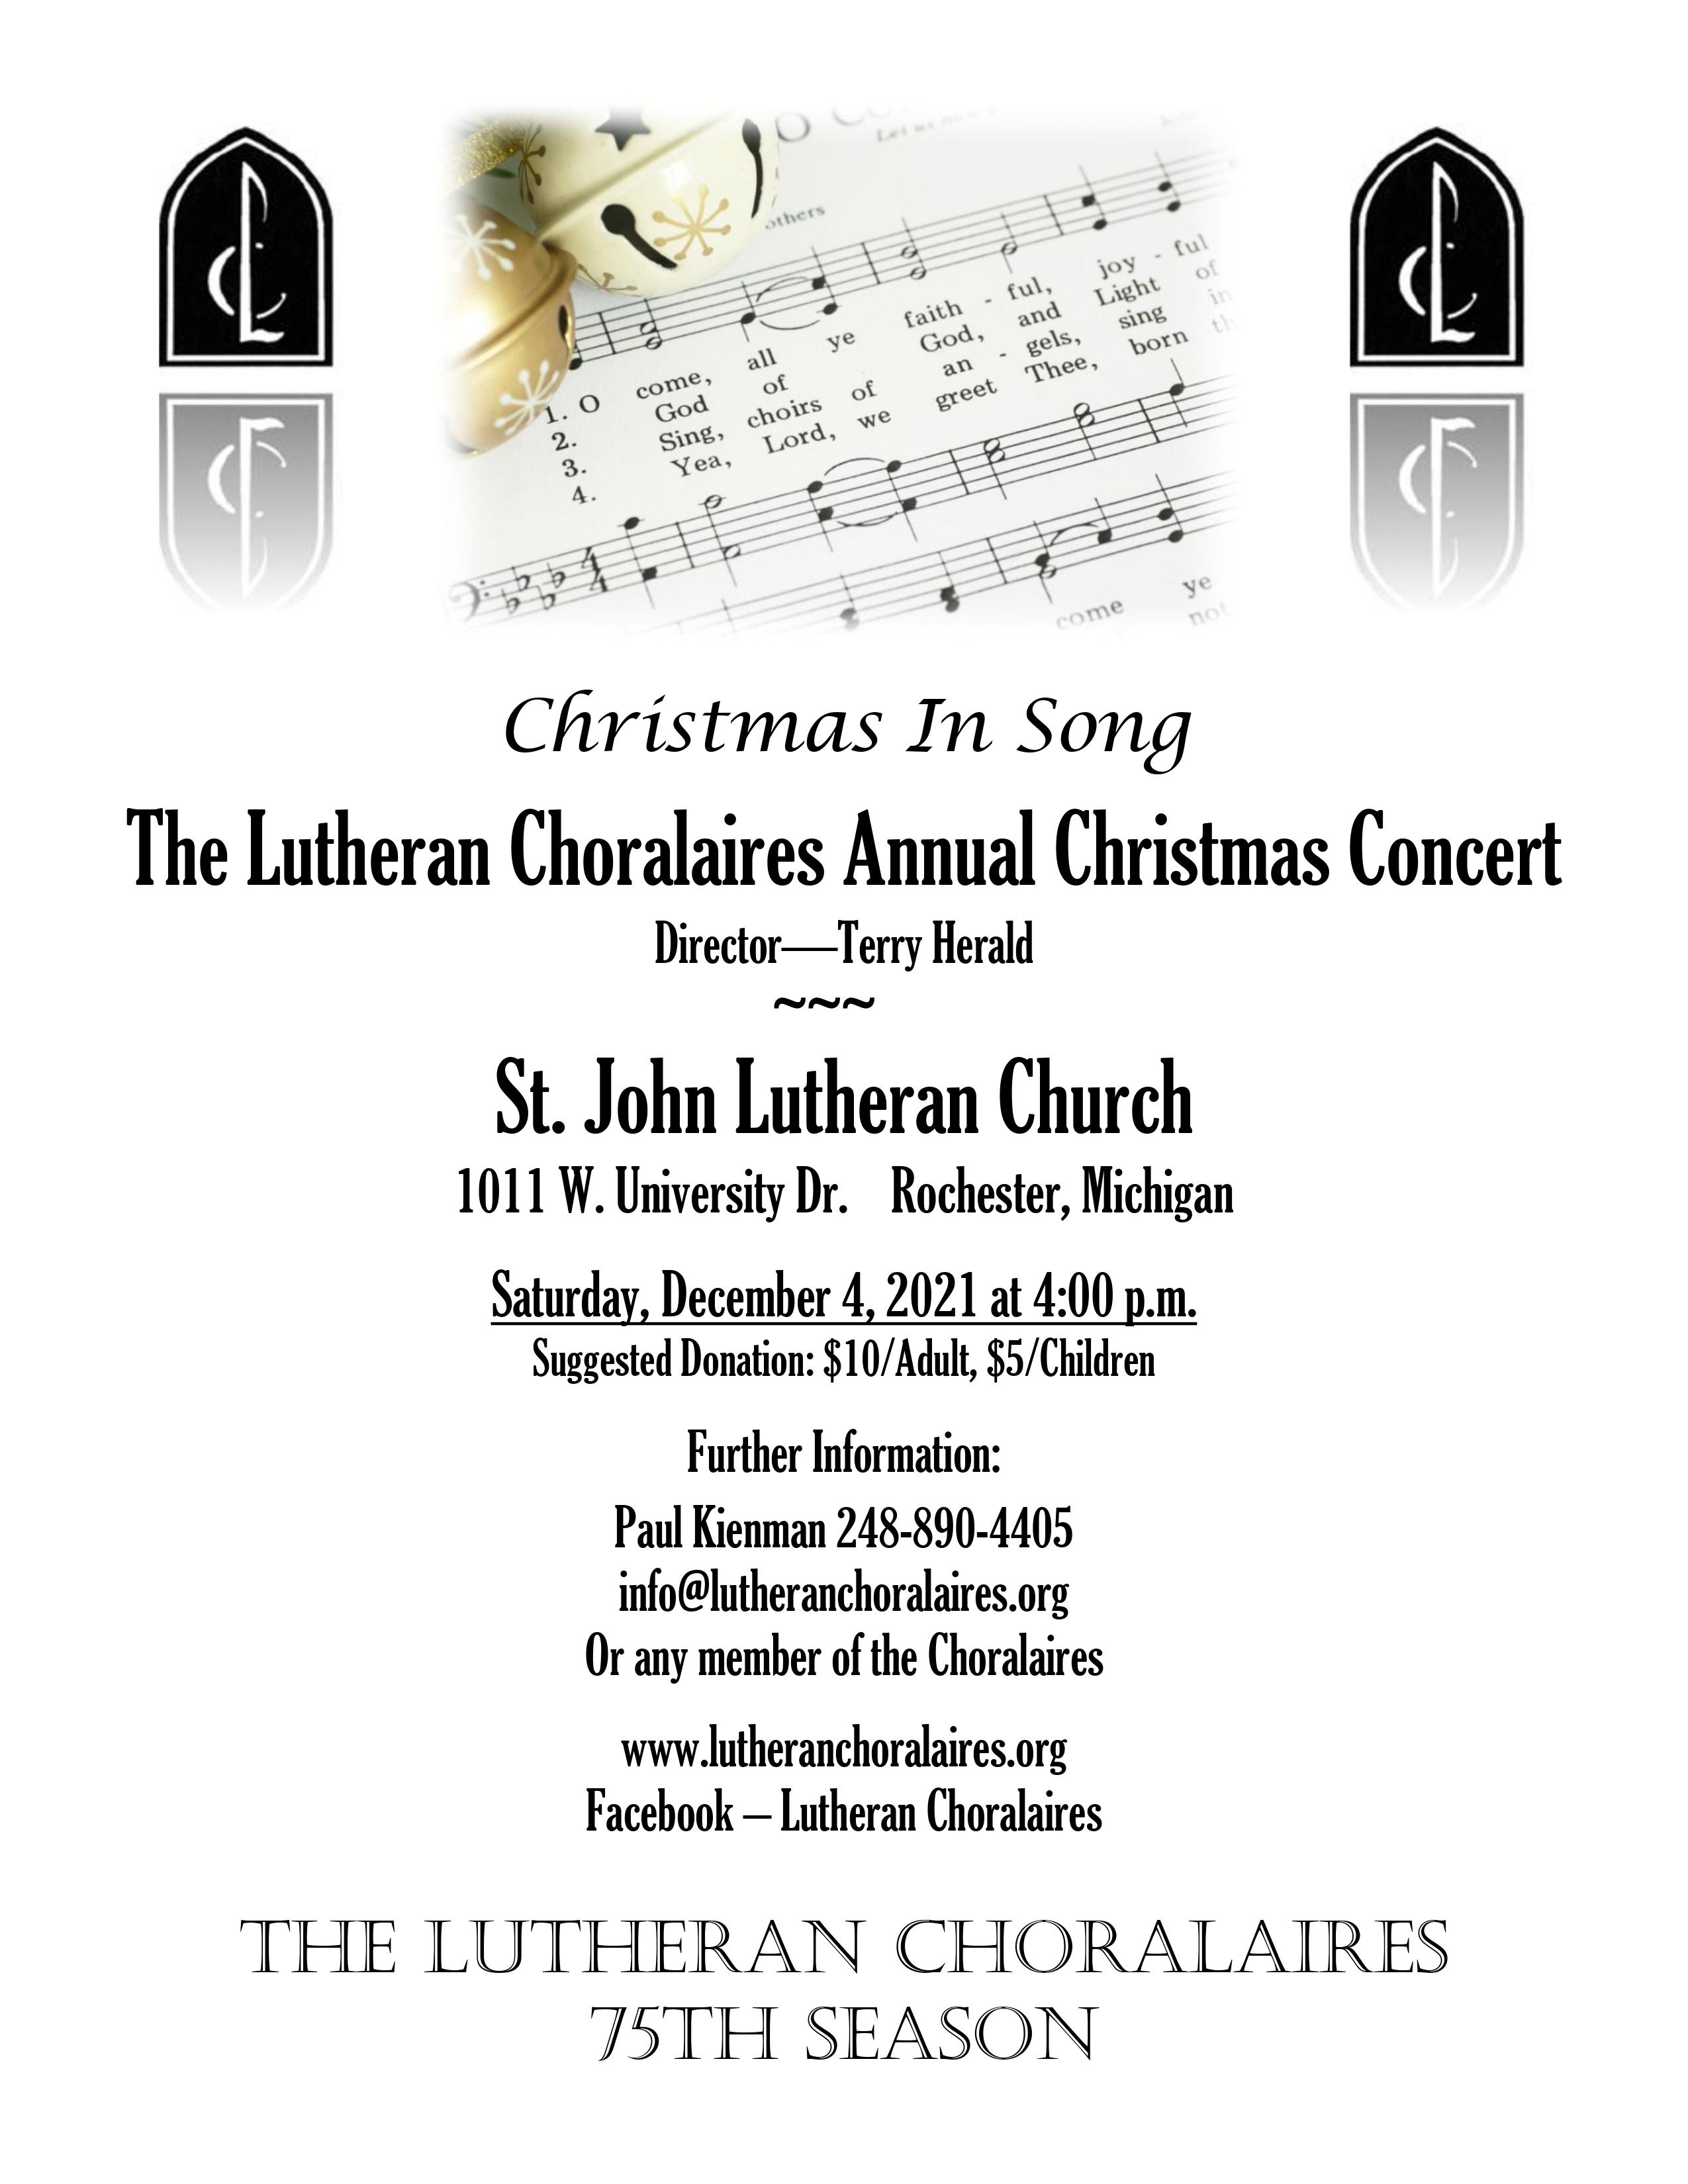 Lutheran Choralaires Christmas 2021 Flyer